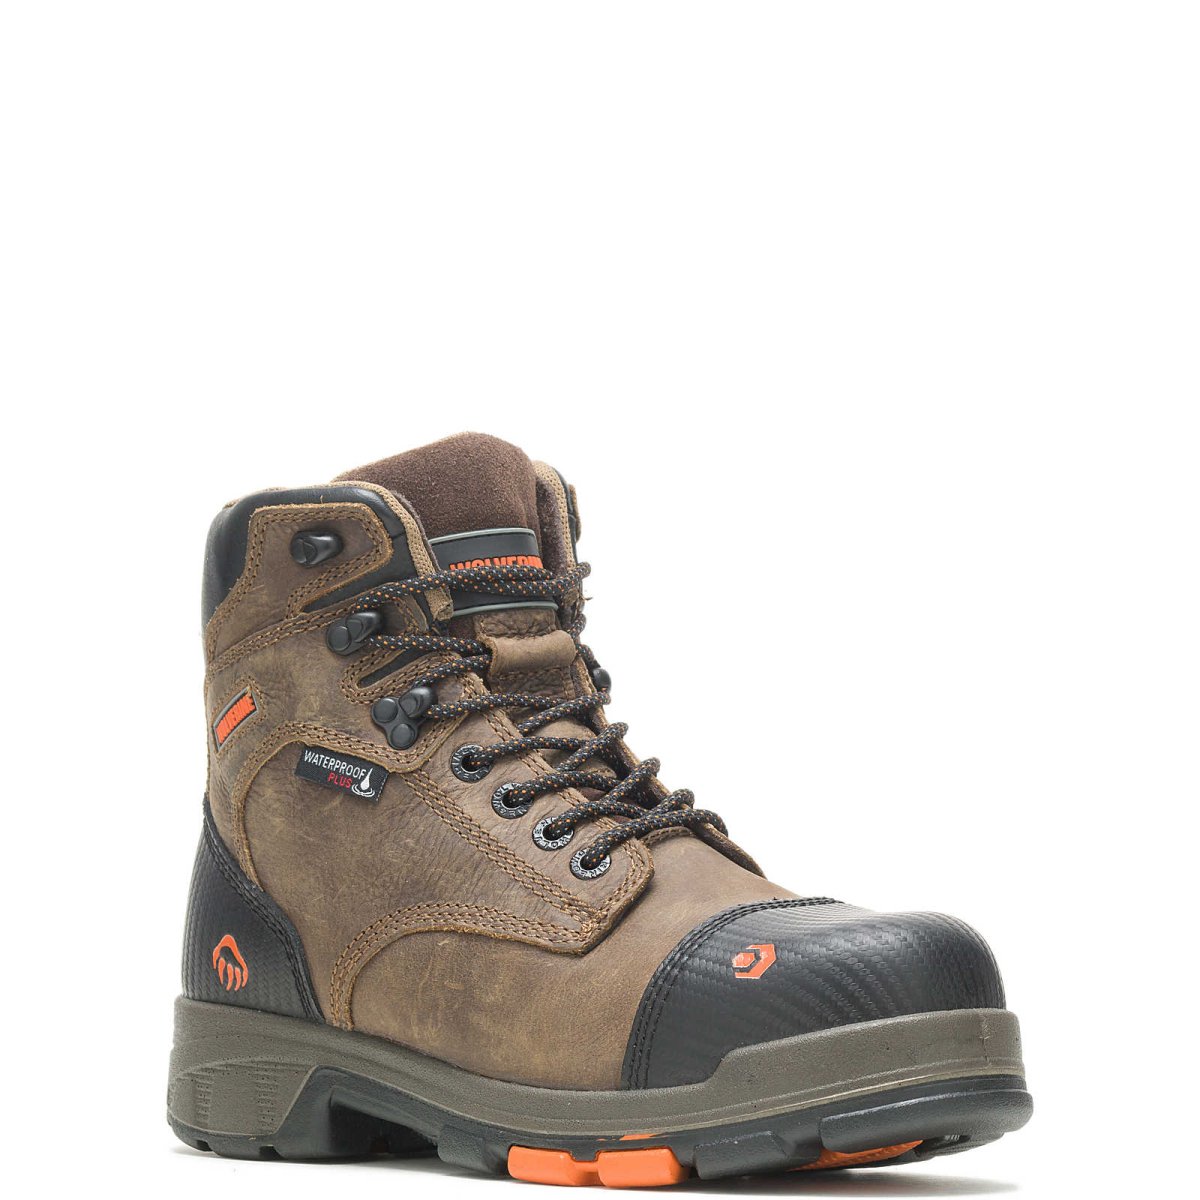 WOLVERINE BLADE LX 6" CM WP MEN'S WORK BOOT (W10653) IN BROWN - TLW Shoes